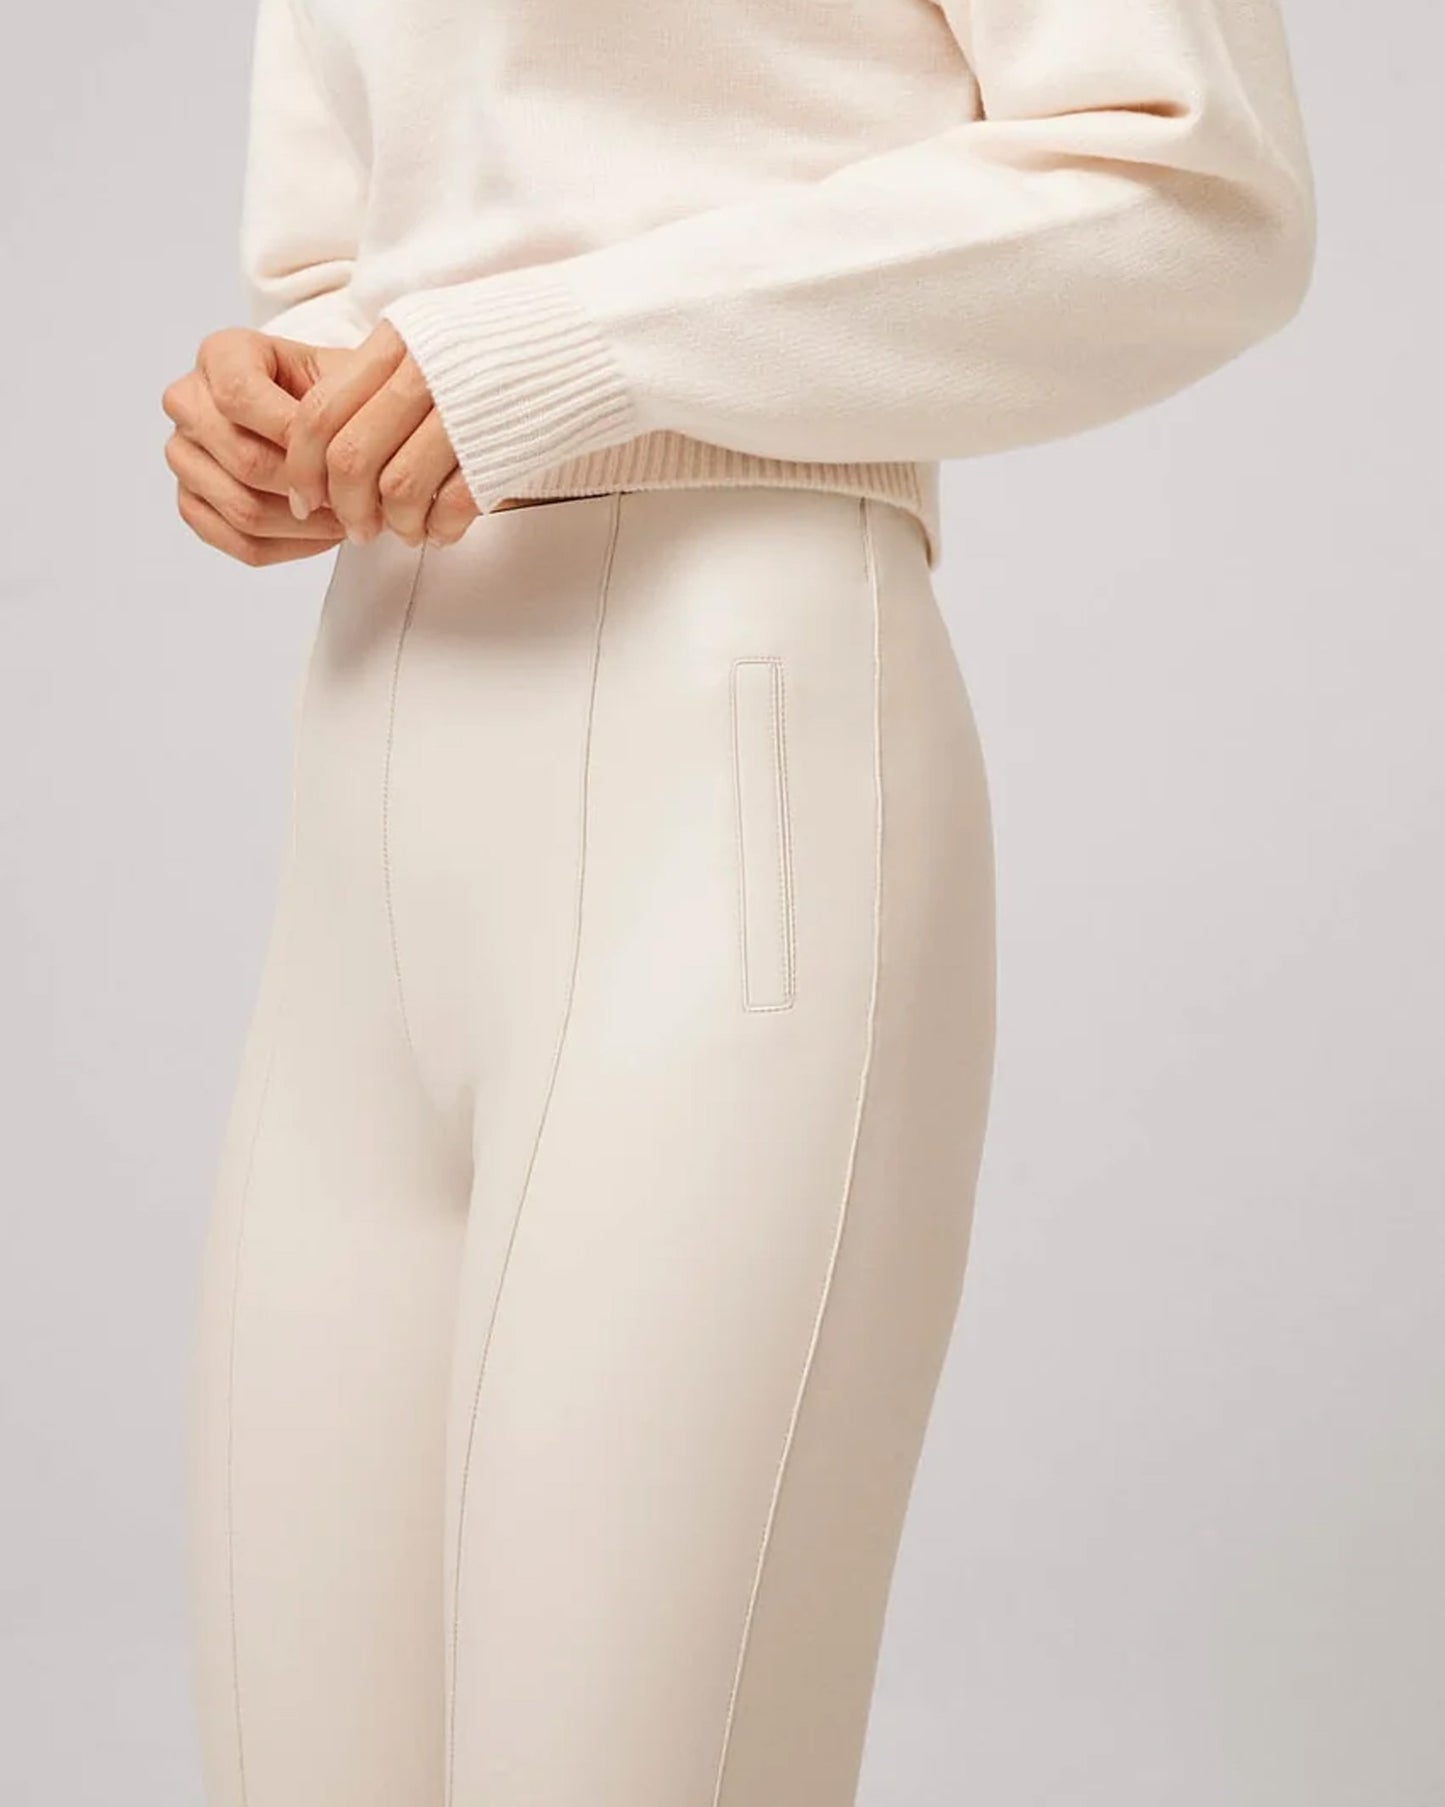 Ysabel Mora 70295 Faux Leather Slit Leggings - Tight fit faux leather thermal cream coloured leggings with a warm plush fleece lining, faux side pocket stitching, centre seam down the front.